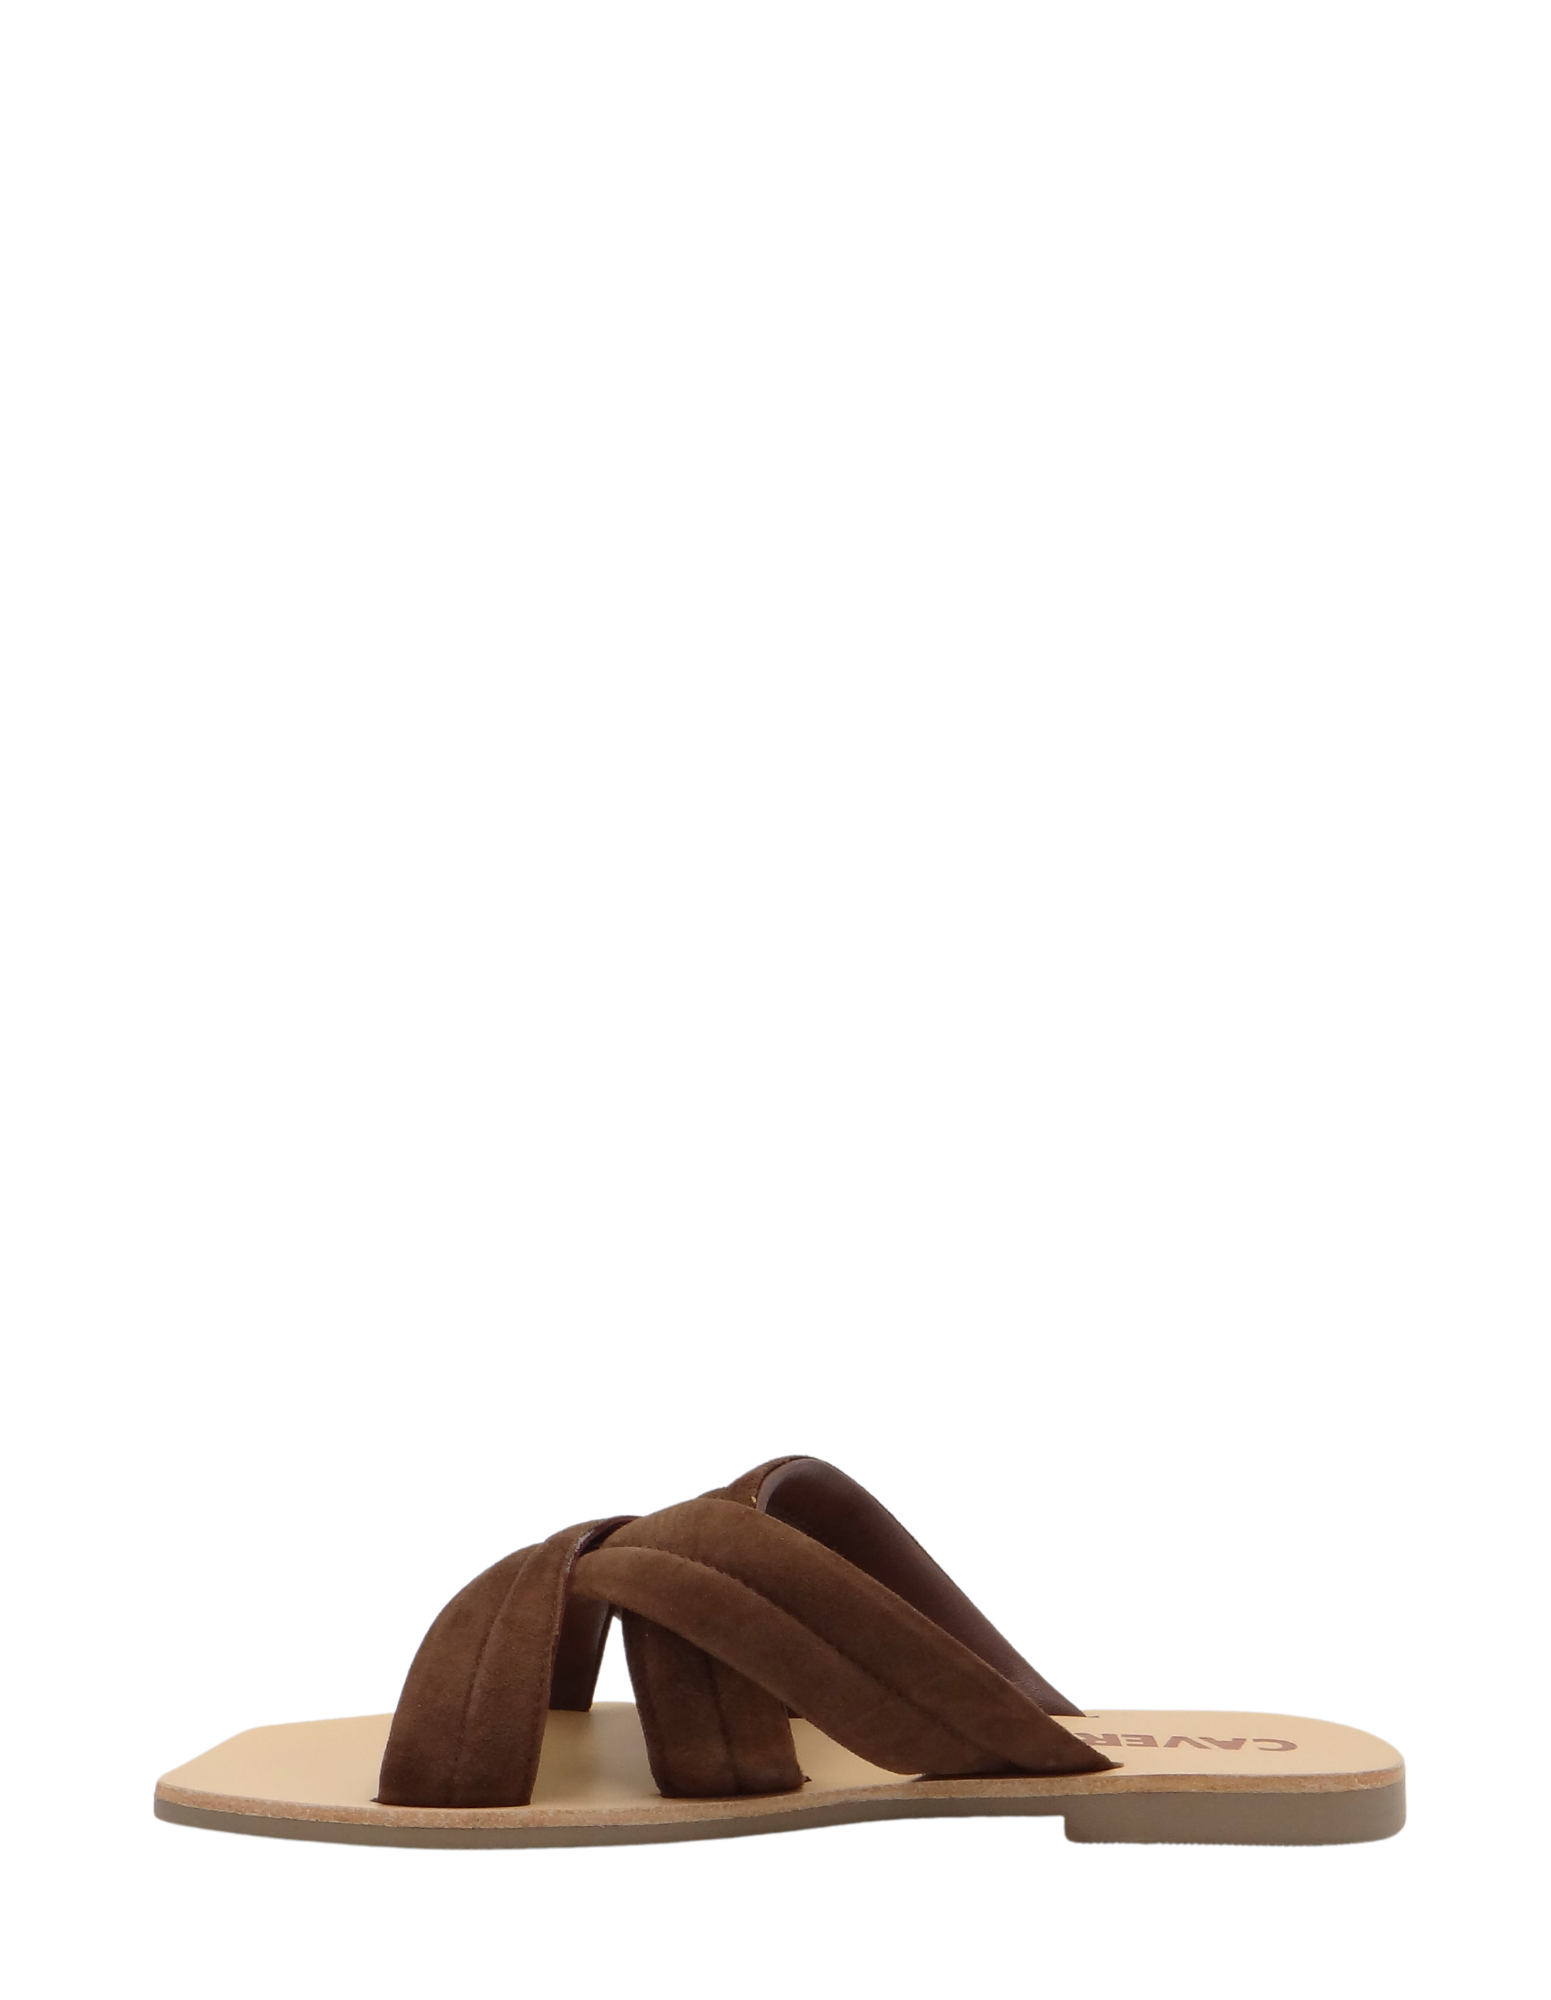 CAVERLEY Bennie Slide in Expresso Suede 23S516C  Expresso Suede FROM EIGHTYWINGOLD - OFFICIAL BRAND PARTNER